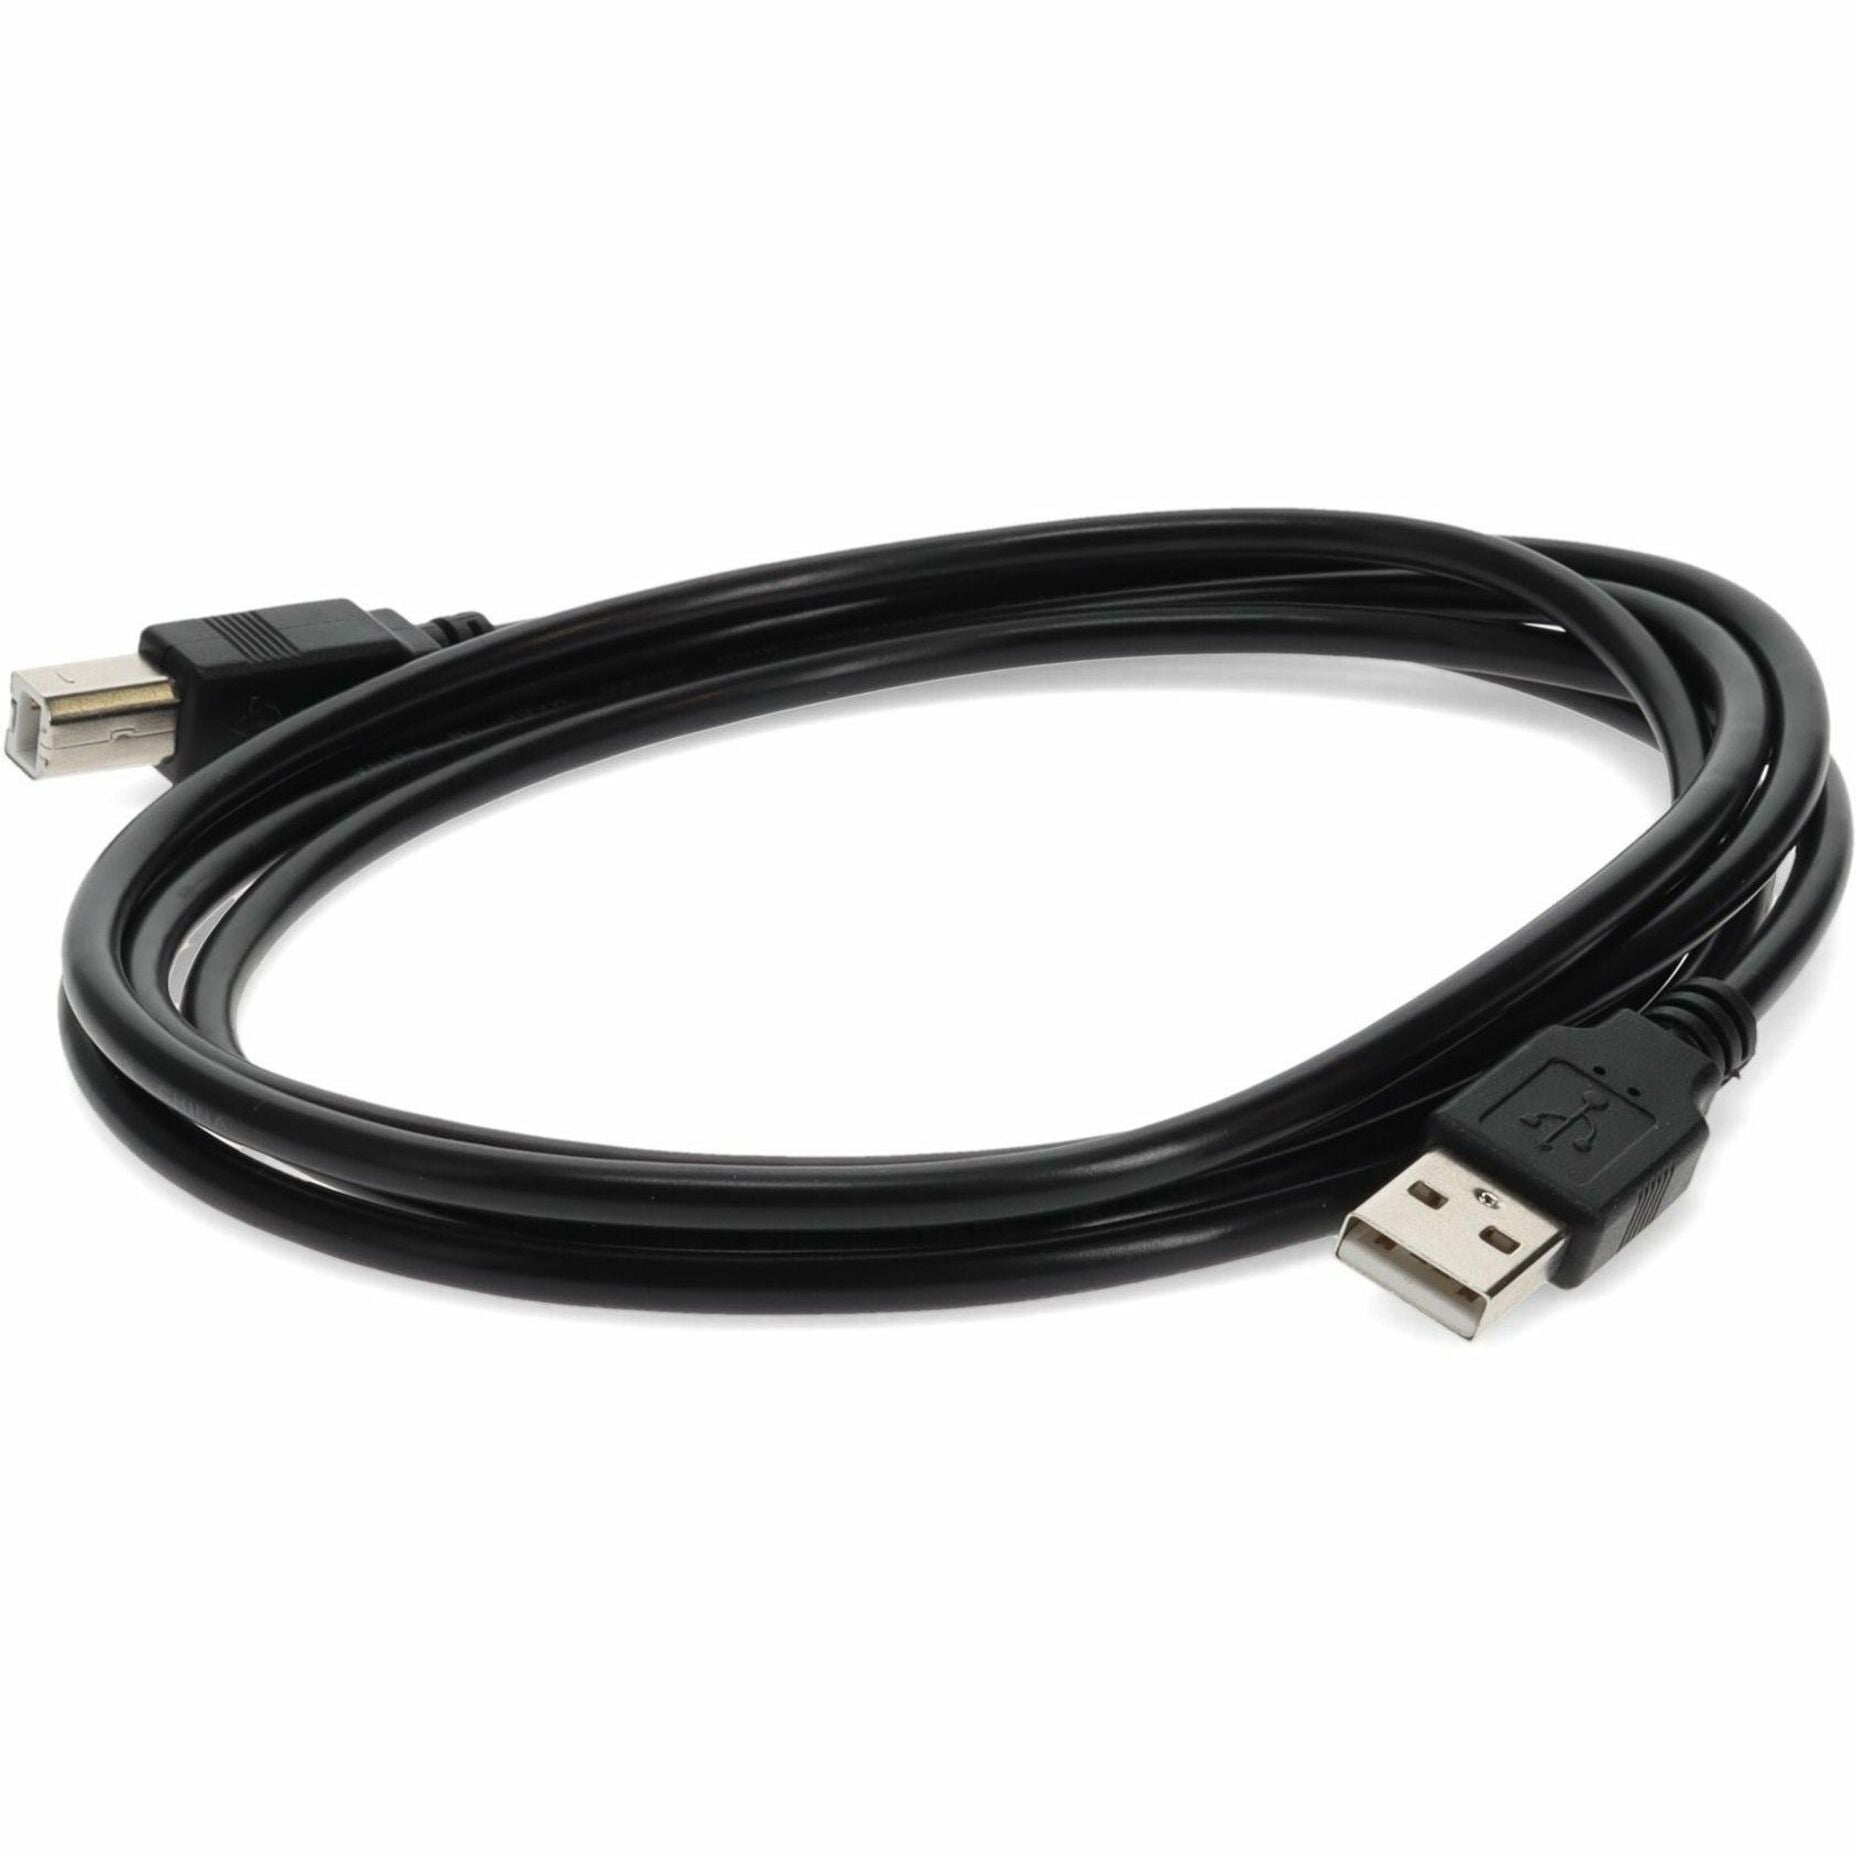 AddOn USBEXTAB10 10ft USB Type A Male to Type B Male Black Cable, Data Transfer Cable